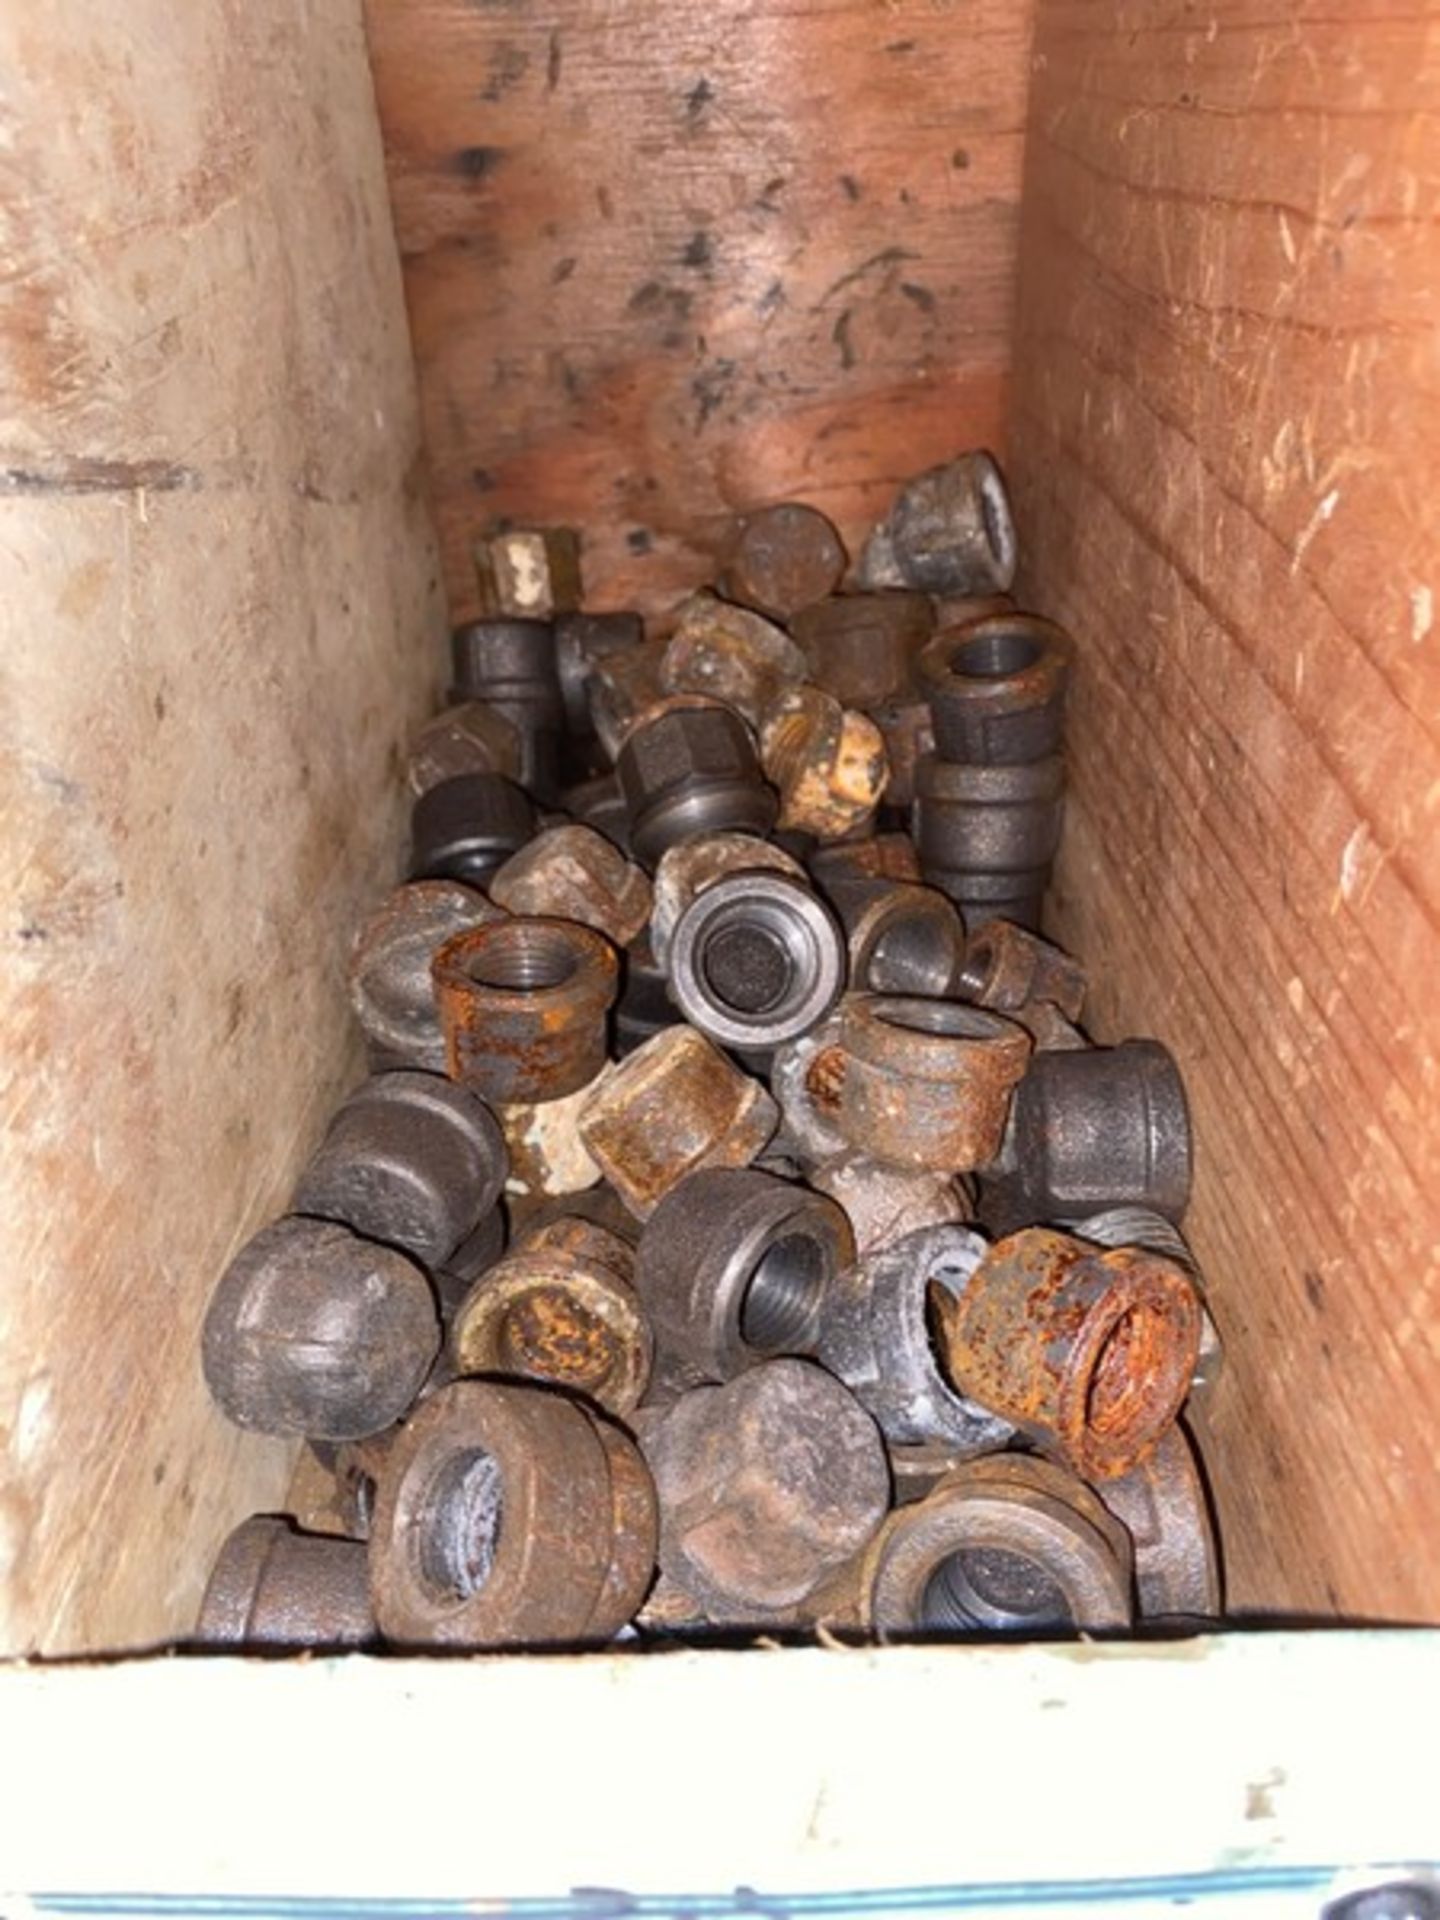 1/2” Union Fitting; 1/2” Coupling Fittings; 1/2” Caps; 3/8”. Caps (LOCATED IN MONROEVILLE, PA) - Image 6 of 7